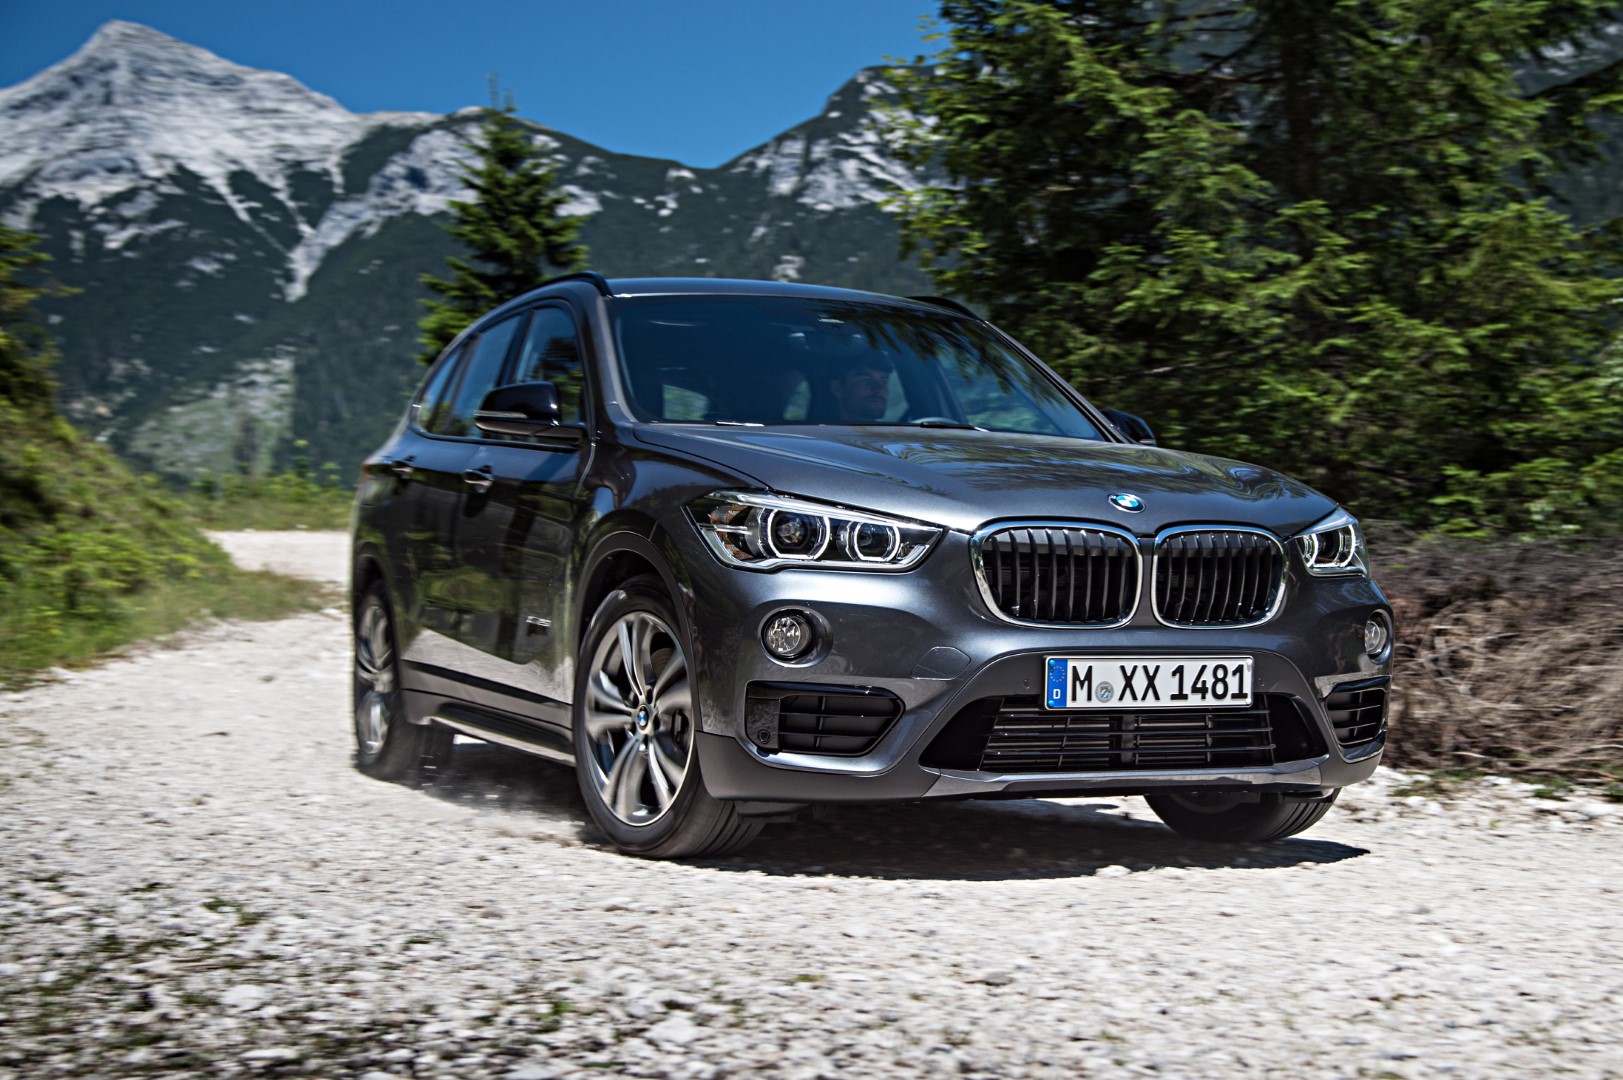 1554707770P90190738-highRes-the-new-bmw-x1-on-lo.jpg